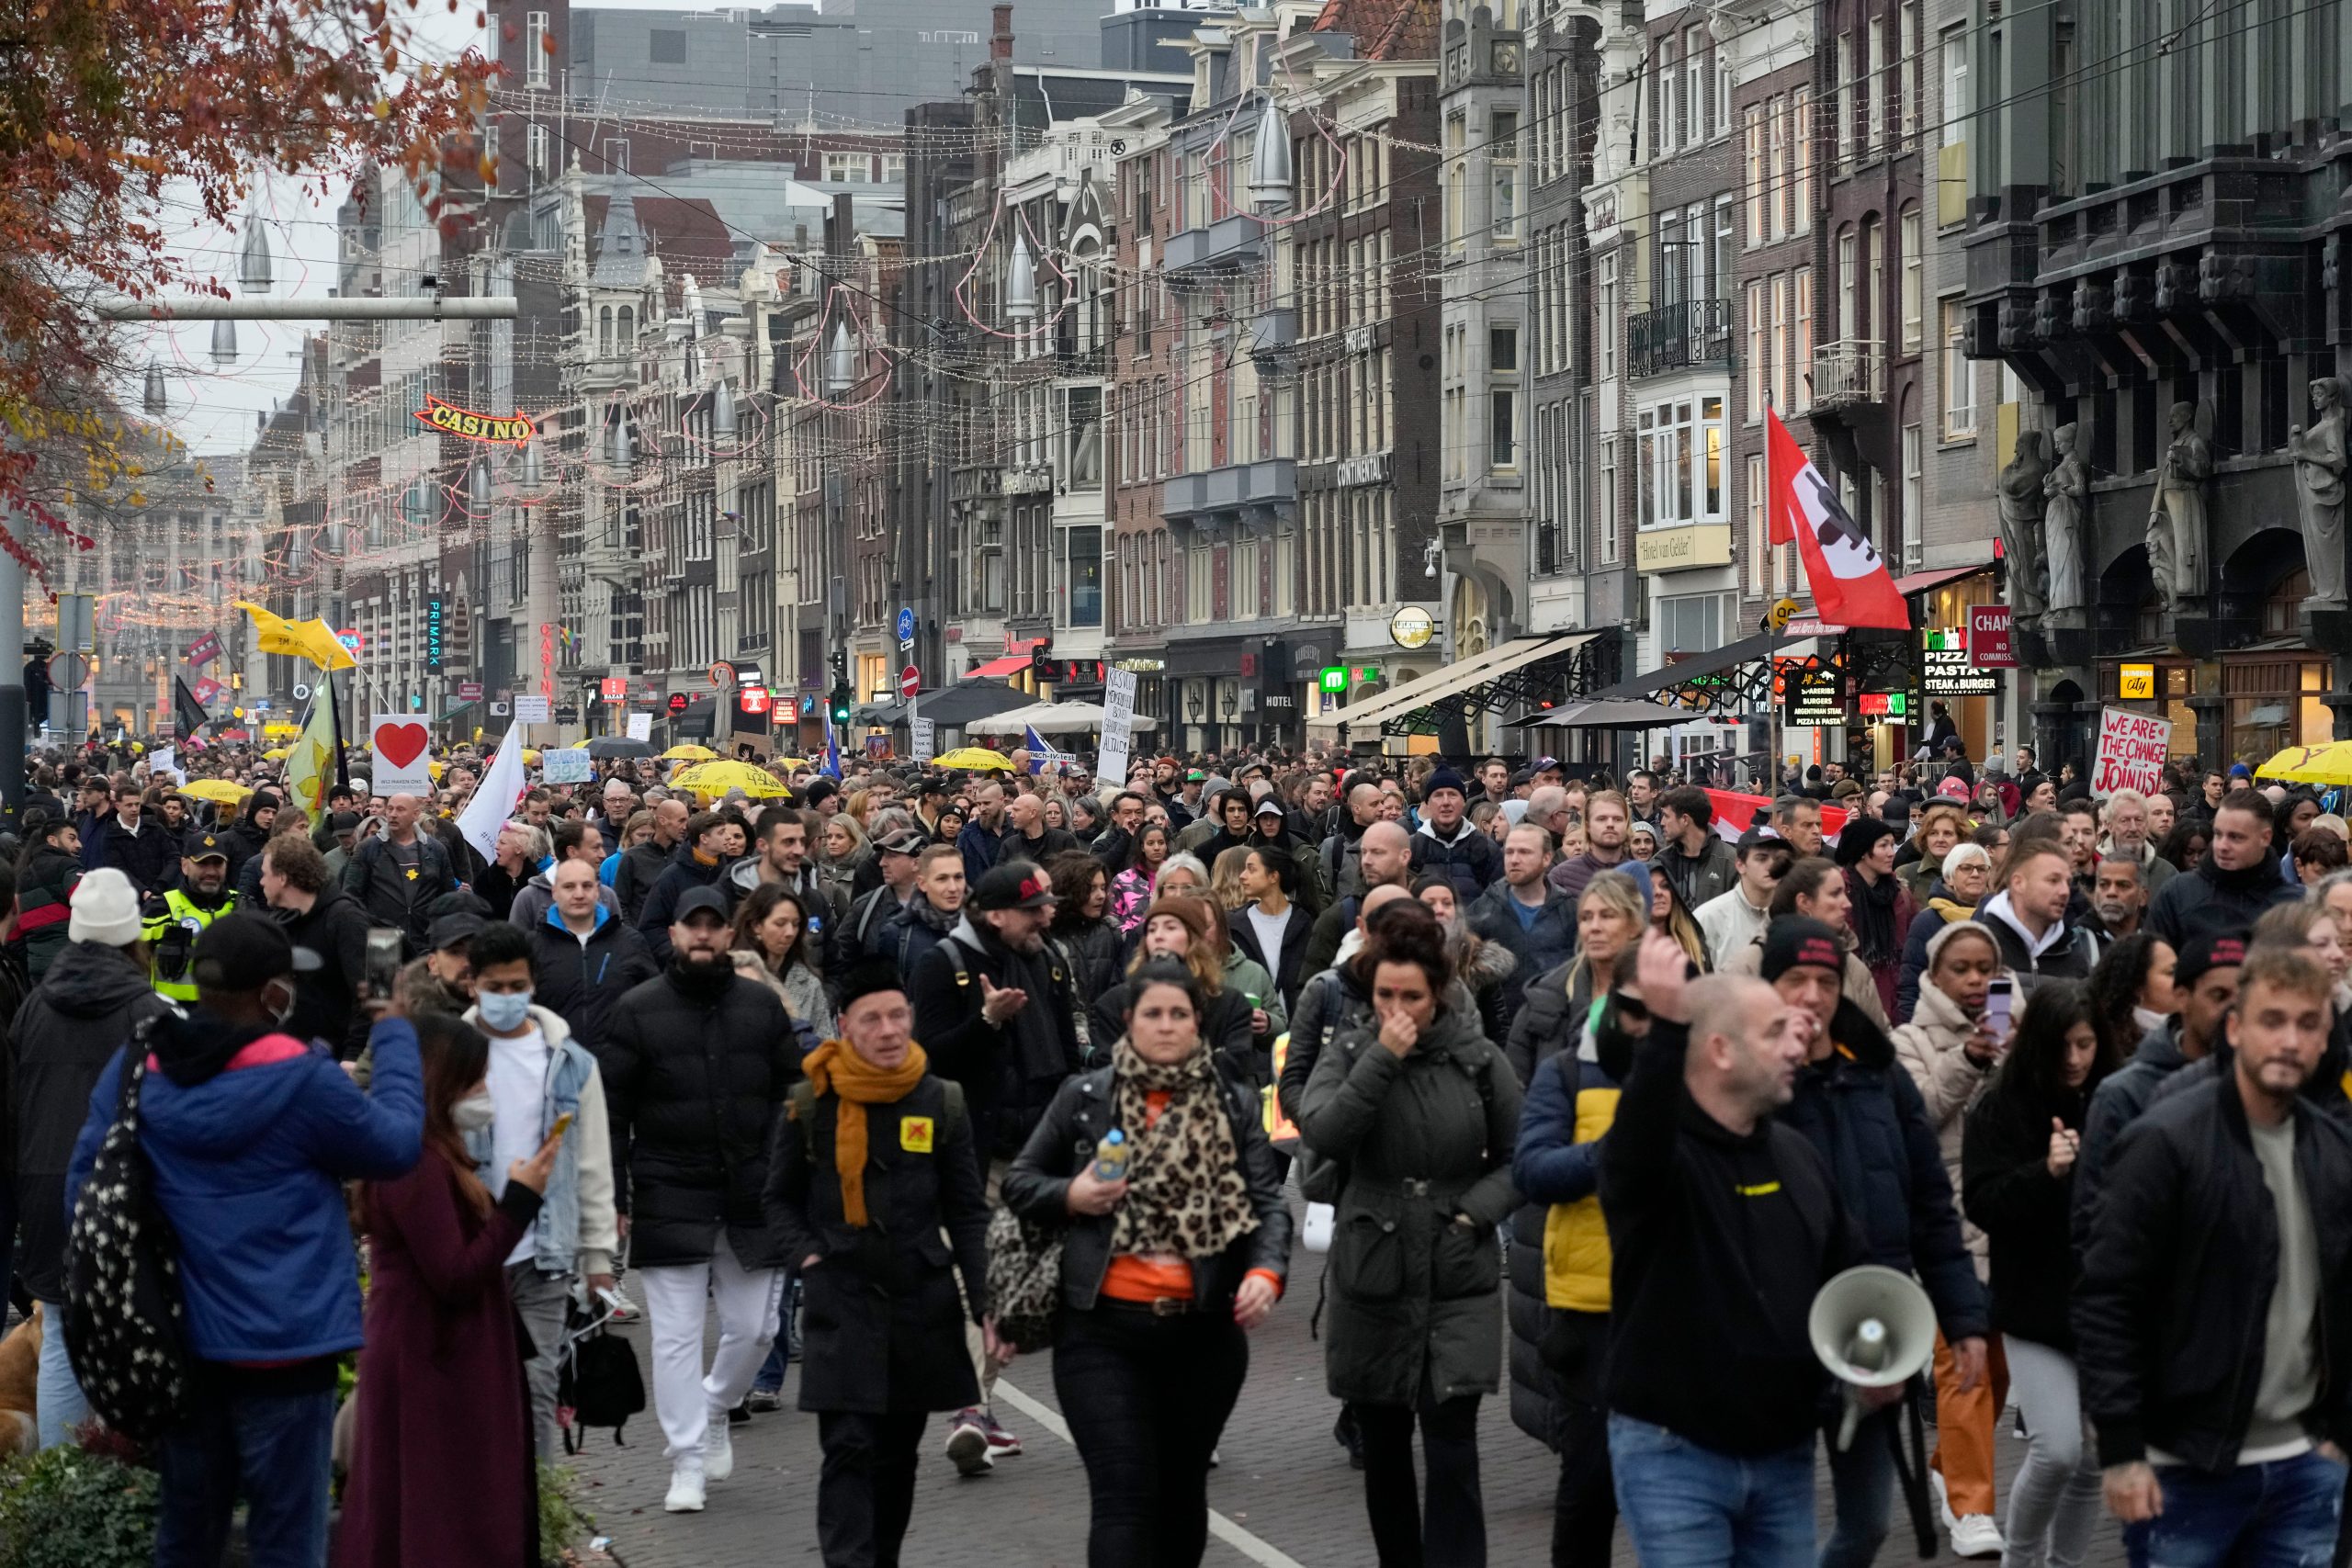 Covid lockdown protests in Netherlands, PM condemns violence by ‘idiots’